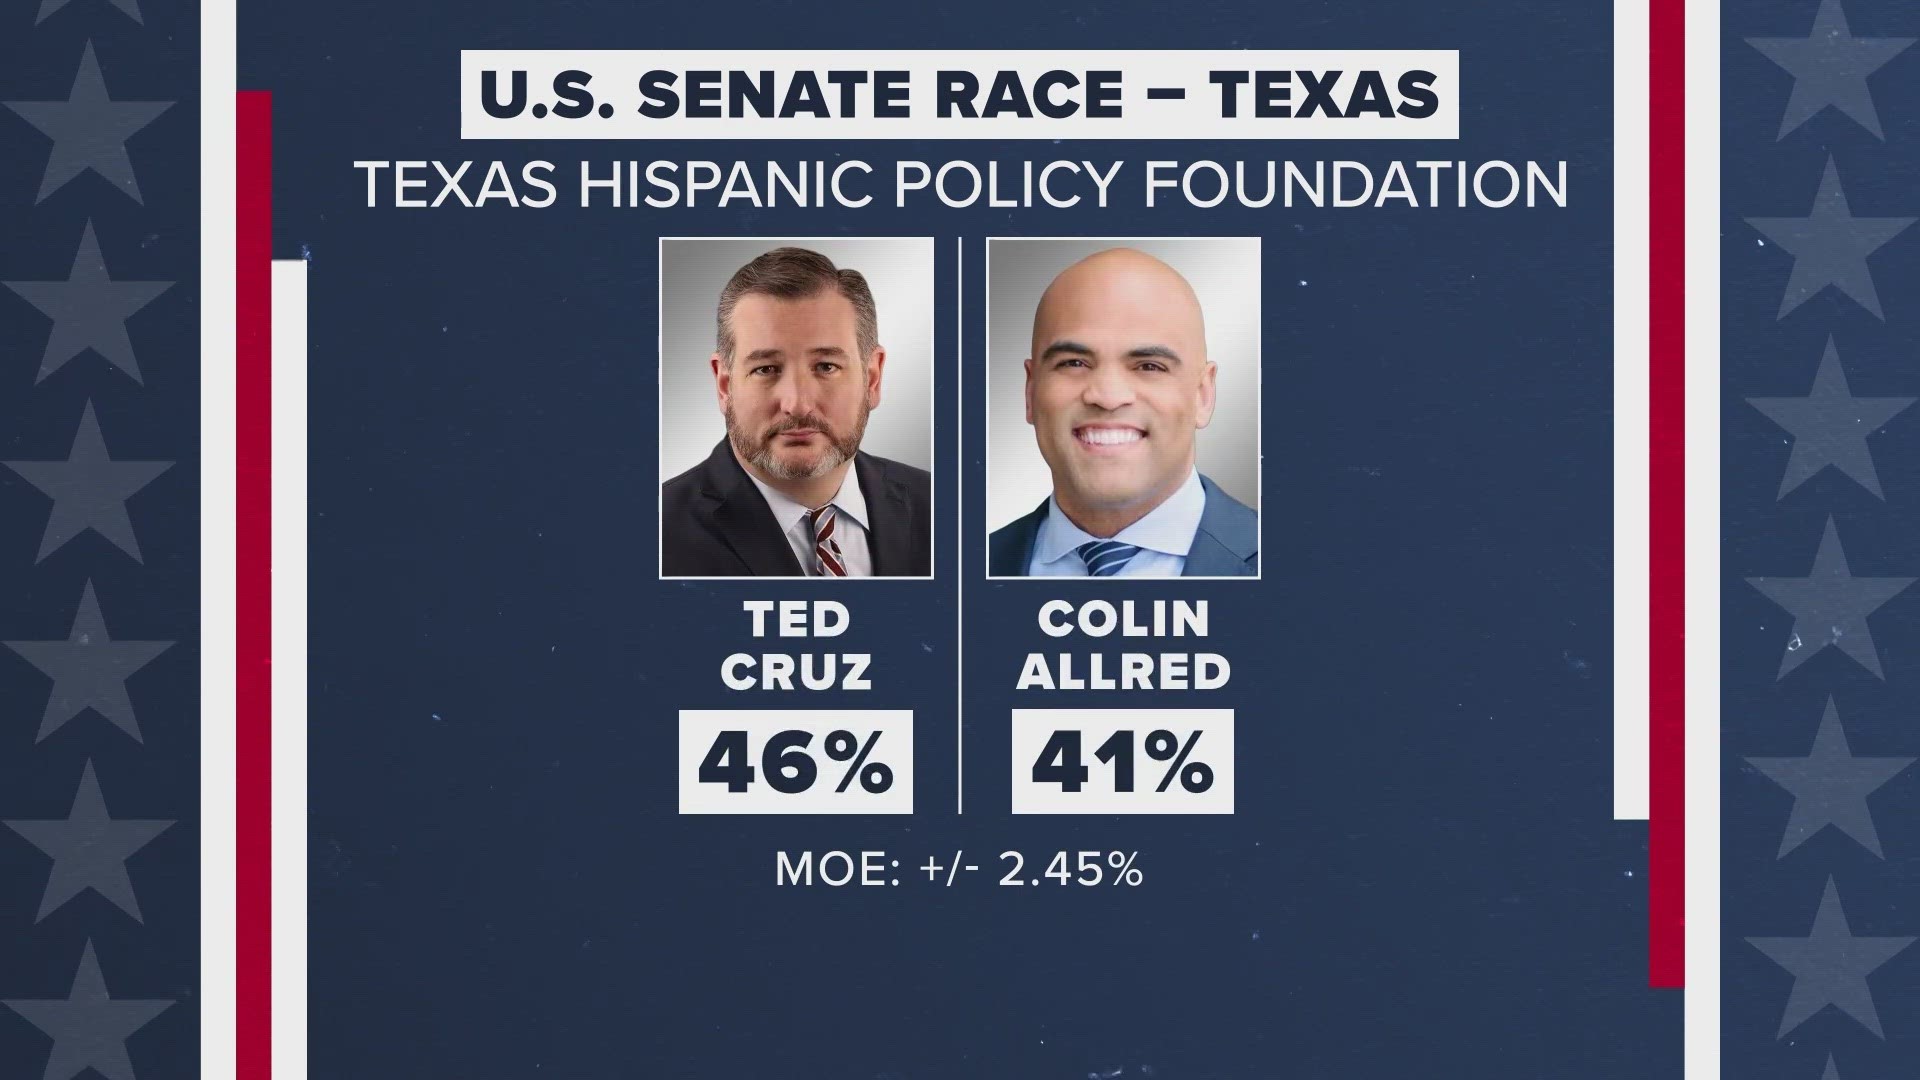 Cruz underperforms, Allred overperforms and, despite abortion restrictions, Trump wins women in Texas, according to a new Texas Hispanic Policy Foundation survey.